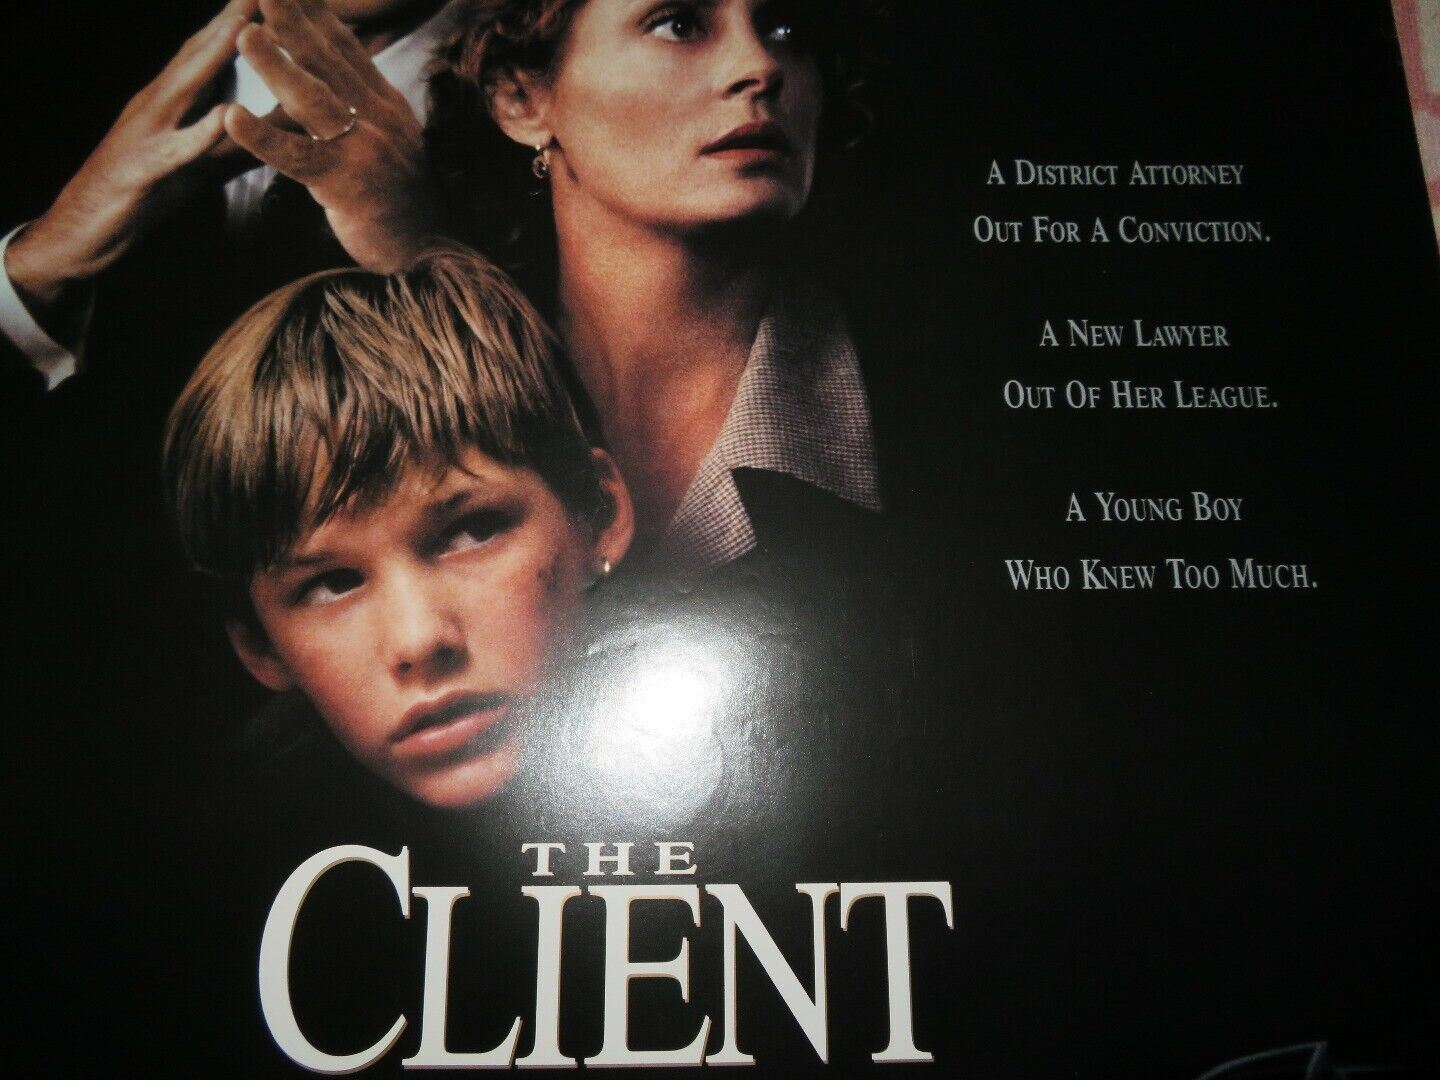 THE CLIENT US ONE SHEET ROLLED POSTER SUSAN SARANDON TOMMY LEE JONES